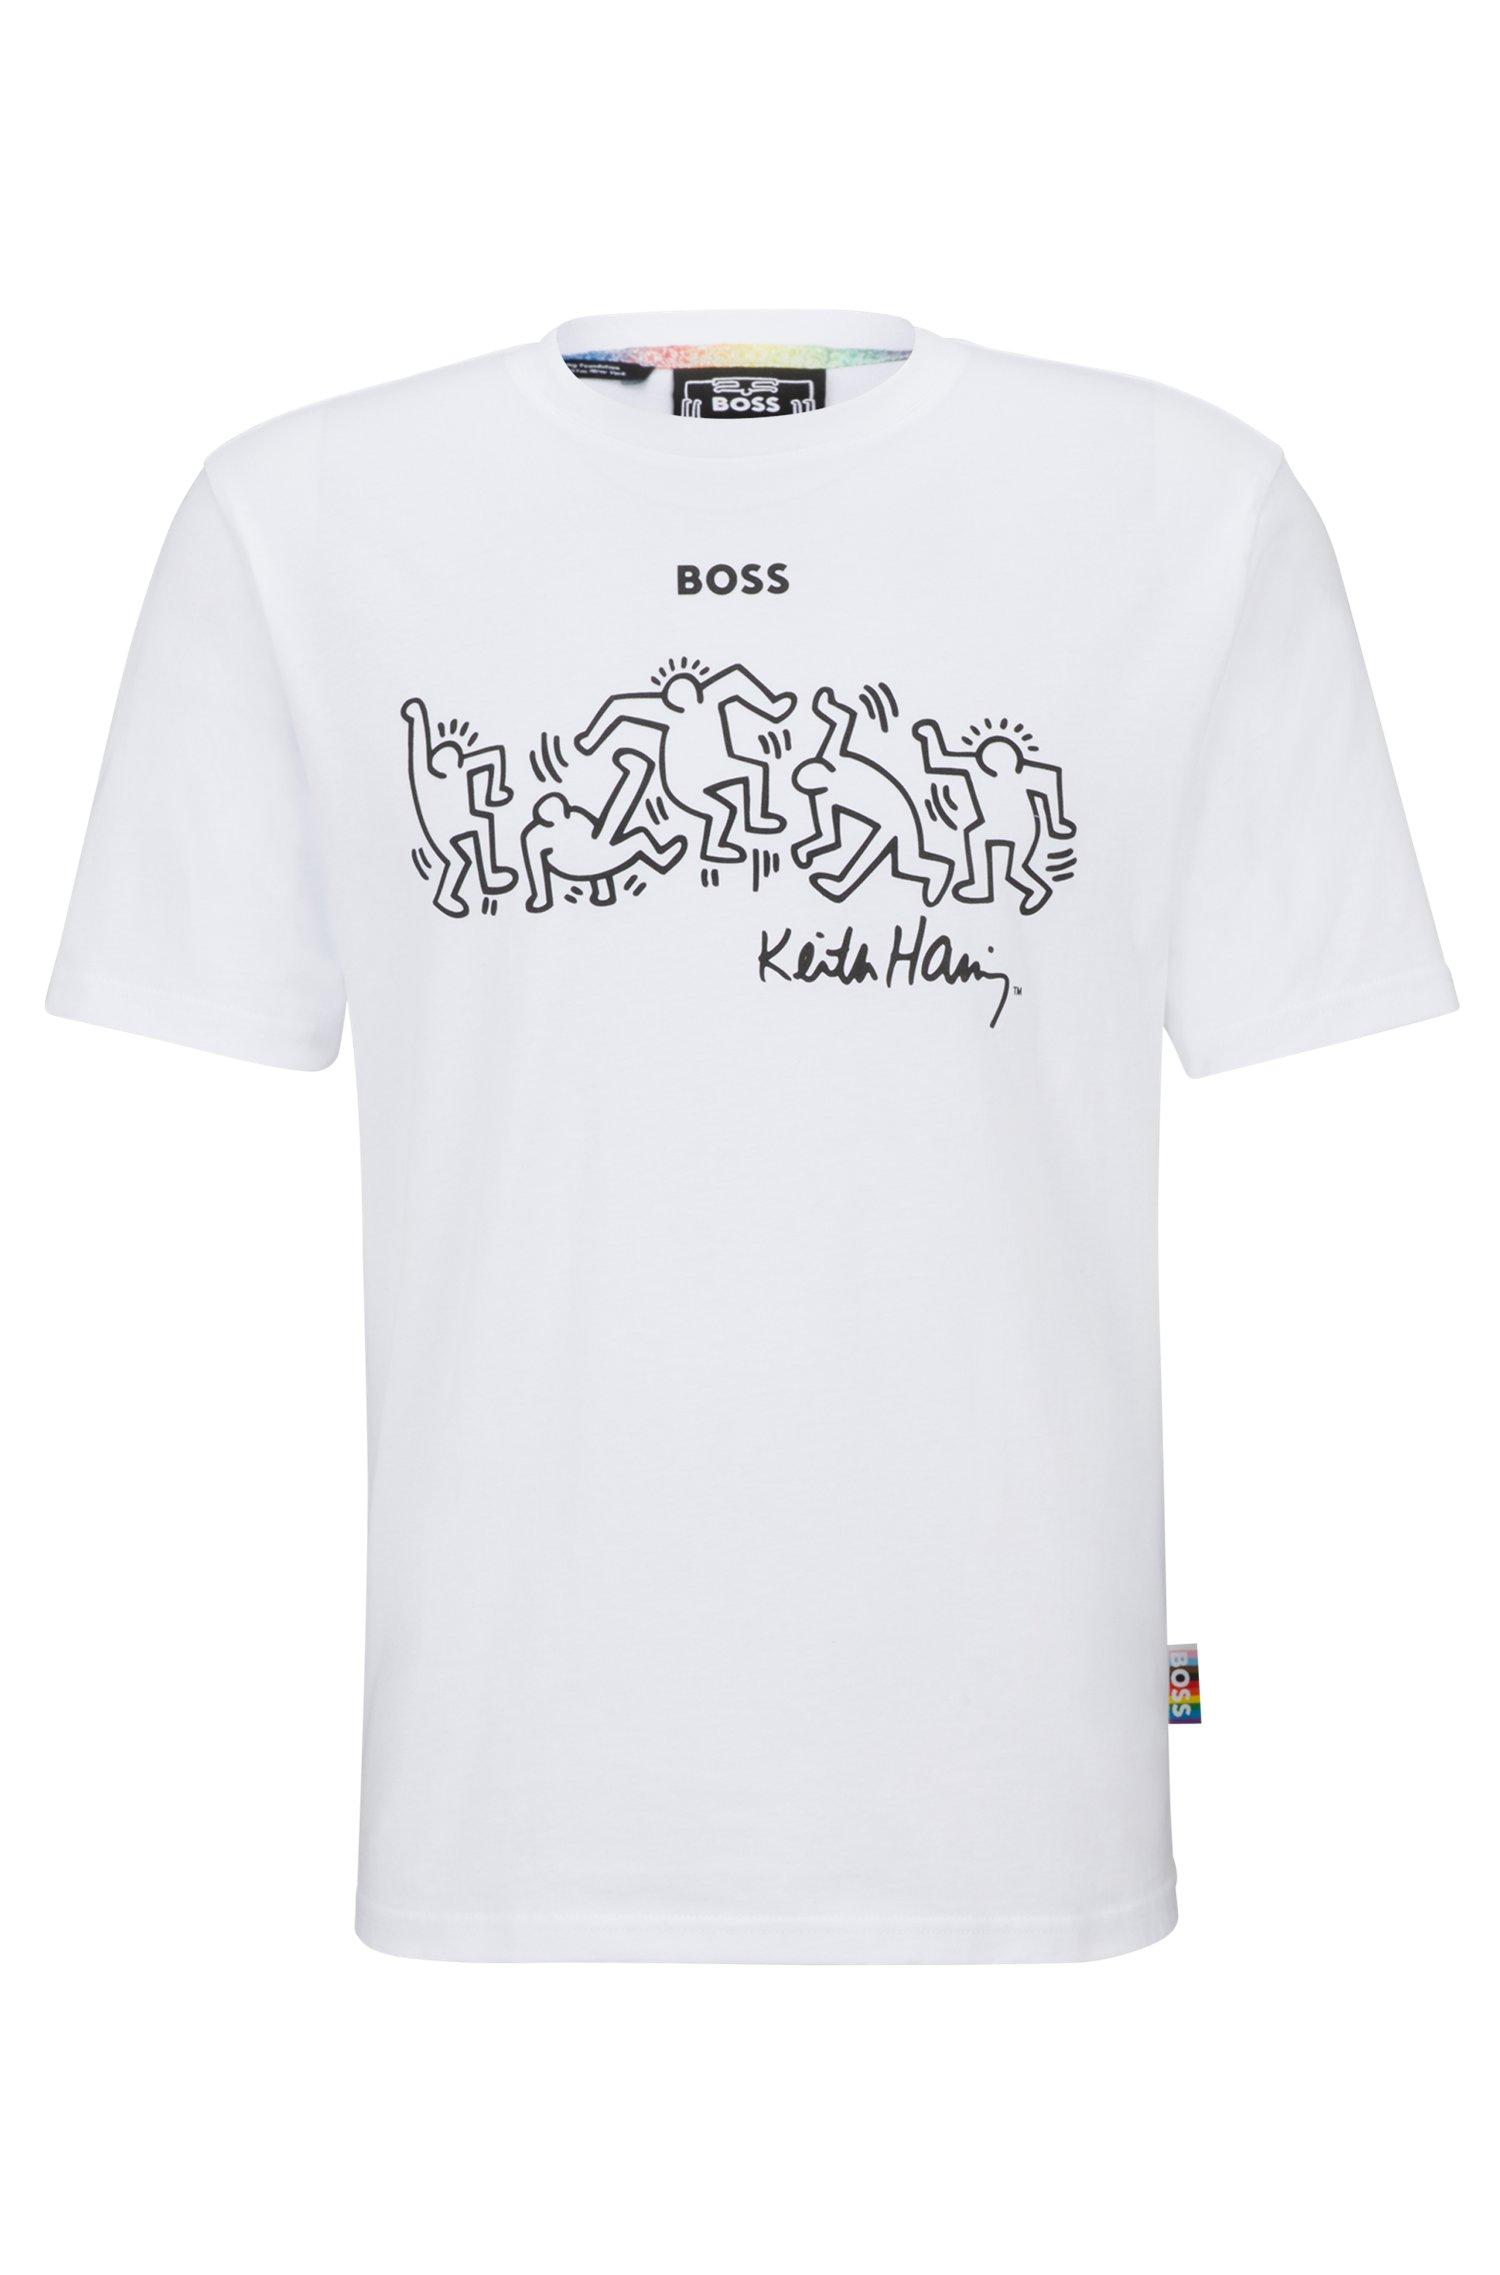 BOSS by HUGO BOSS X Keith Haring T-shirt With Special Logo Artwork in ...